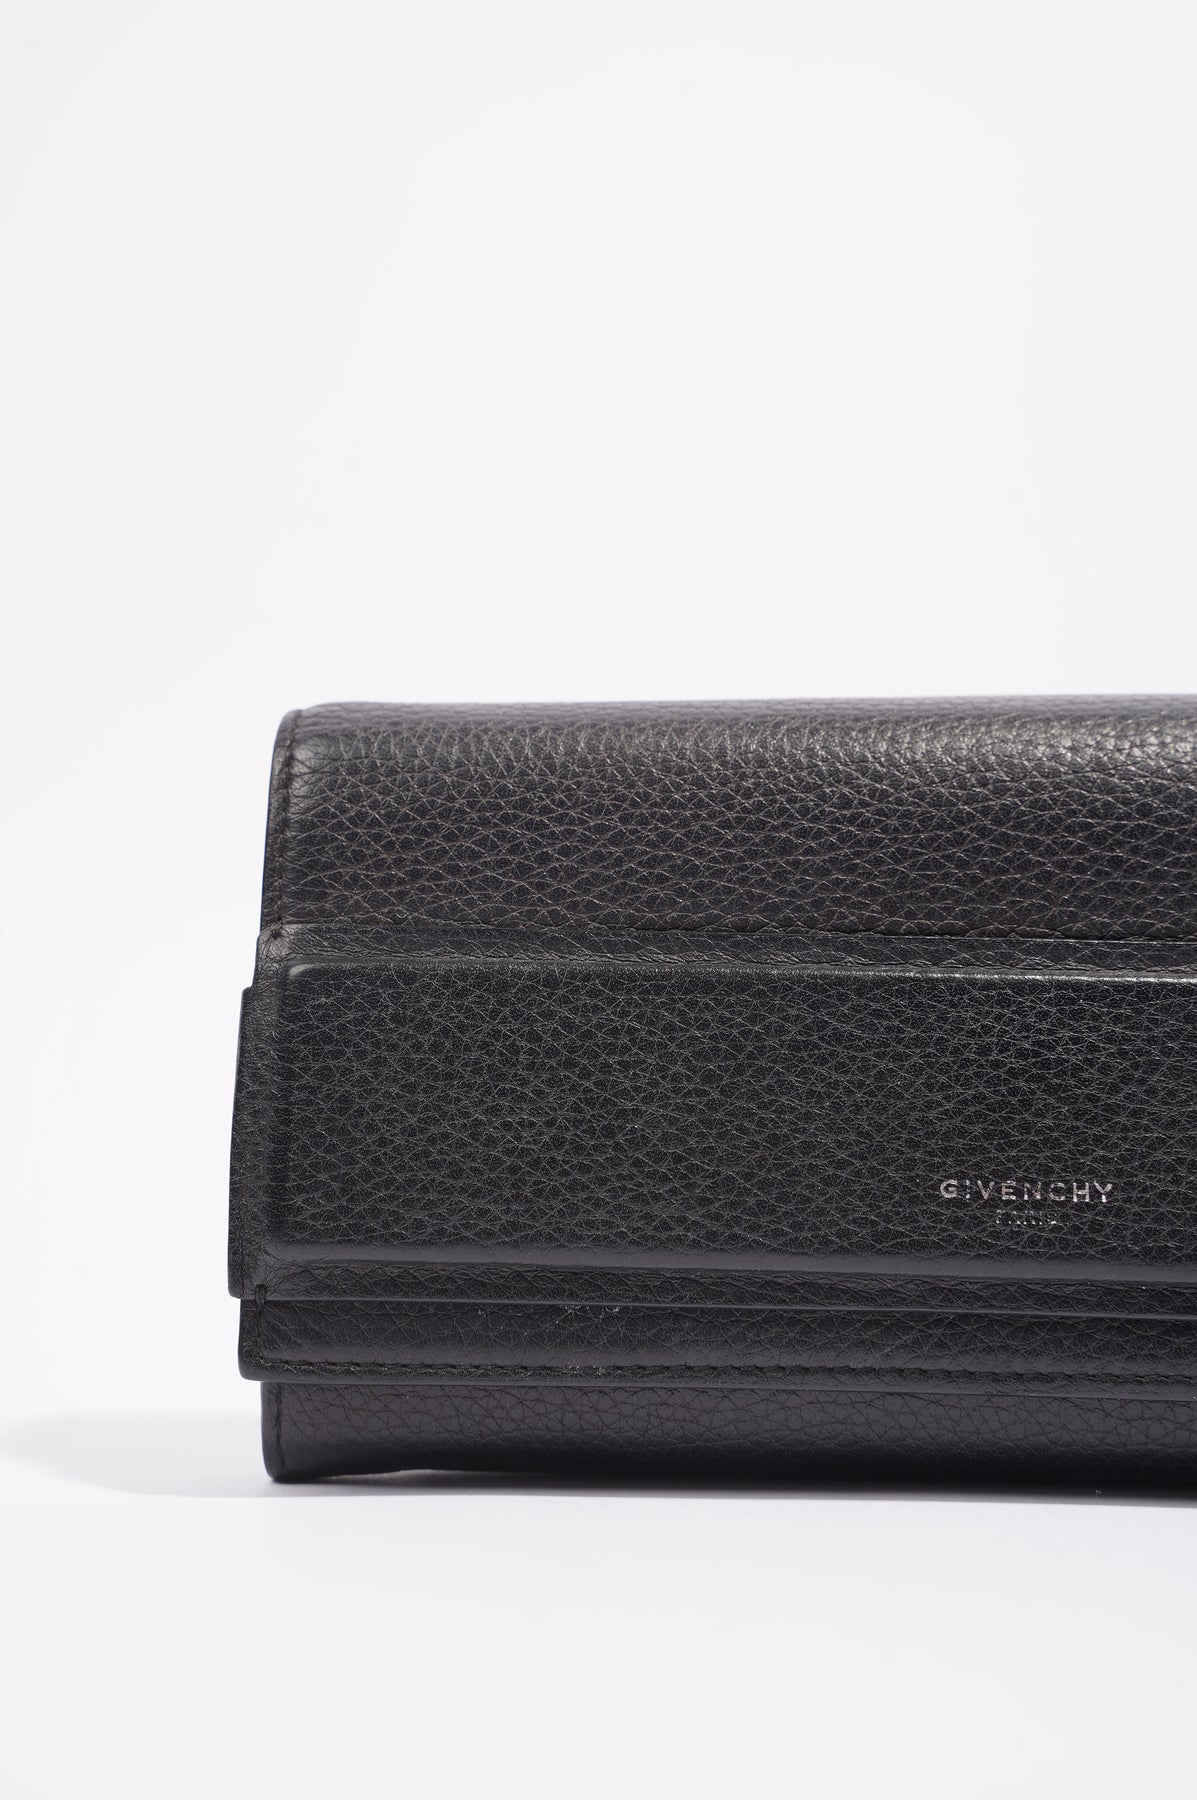 Givenchy Womens Horizon Wallet Black Leather Long – Luxe Collective